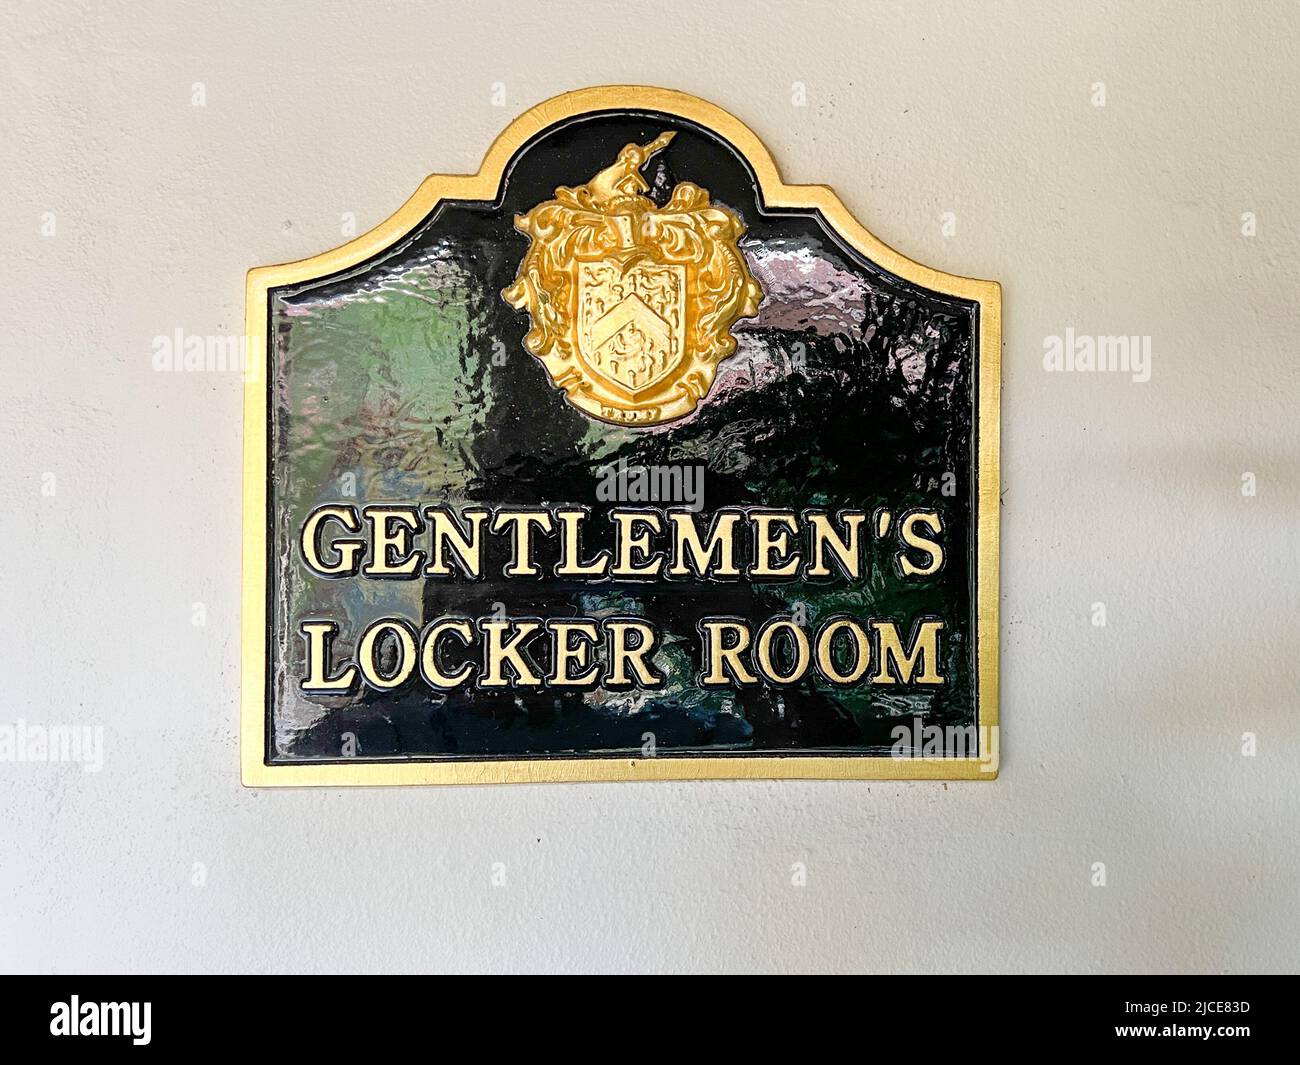 Jupiter, FL USA - May 31, 2022:  The Gentlemens Locker Room sign at the Trump National Golf Course club House in Jupiter, Florida. Stock Photo